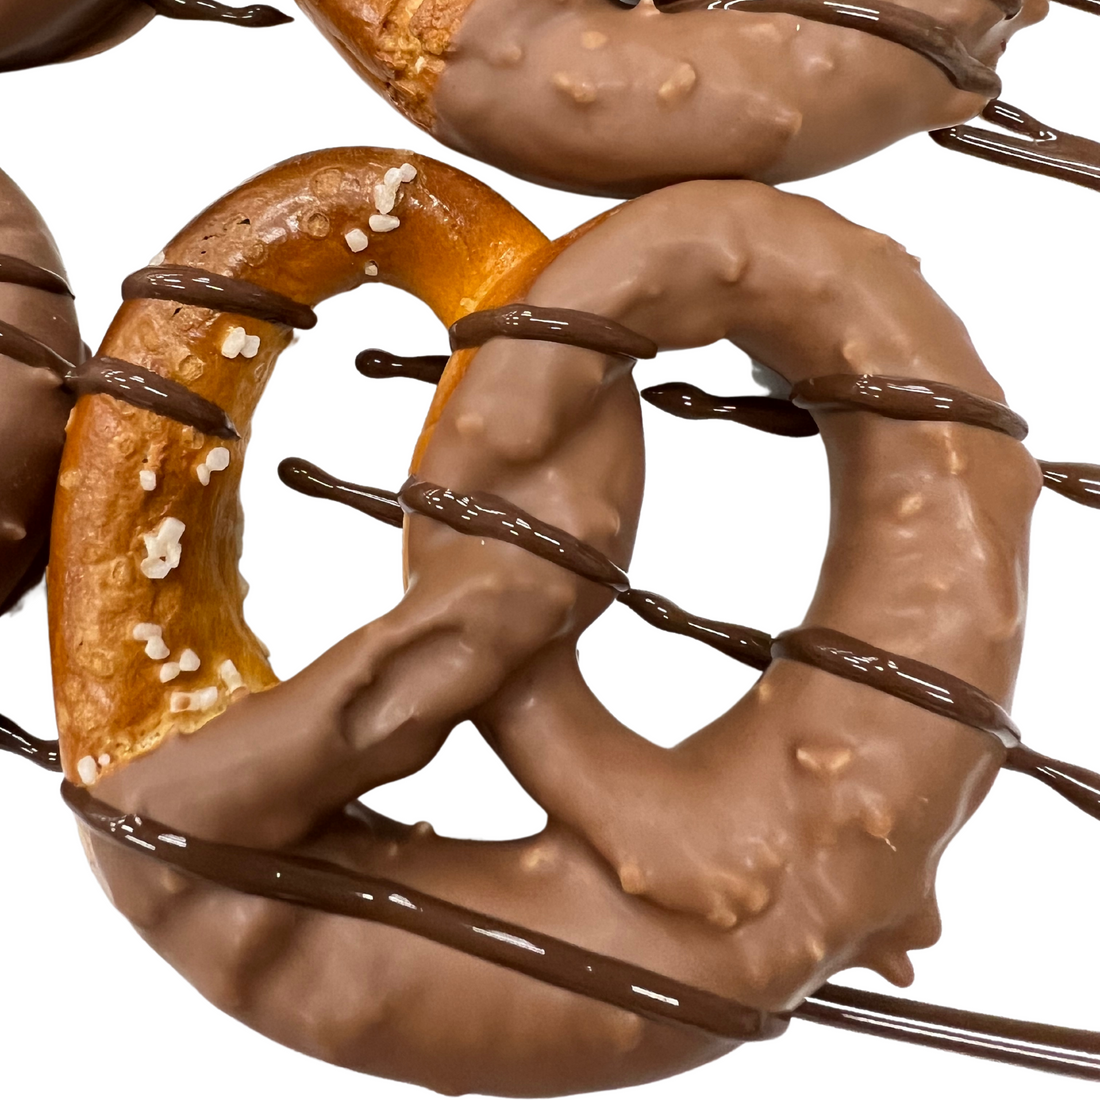 Hand-Dipped Milk Chocolate Covered Pretzels